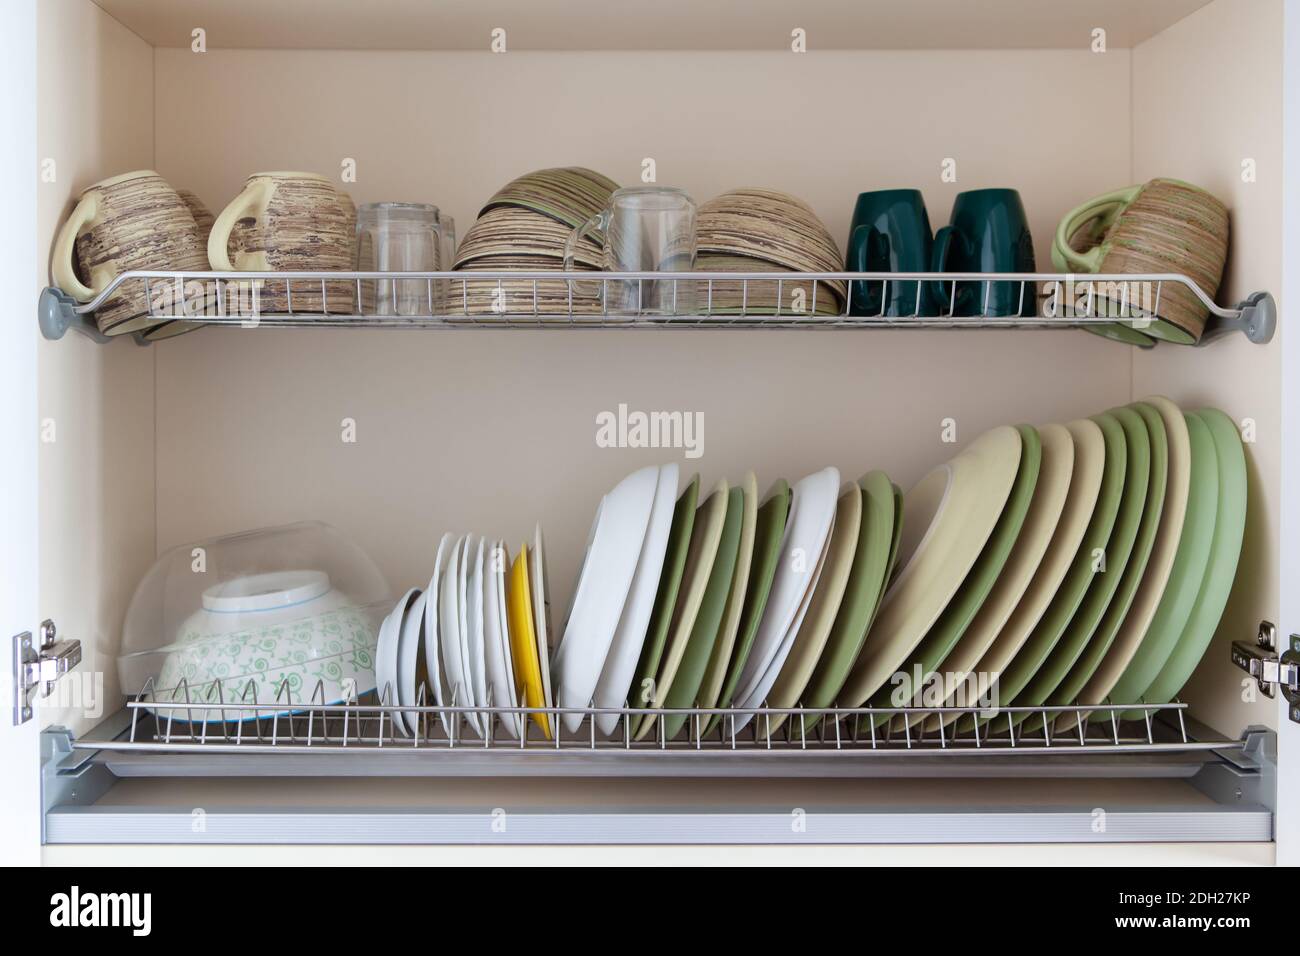 https://c8.alamy.com/comp/2DH27KP/clean-dishes-in-white-and-green-tones-in-a-drying-cabinet-cups-glasses-mugs-plates-bowls-saucers-on-metal-shelves-concept-for-kitchen-interior-2DH27KP.jpg